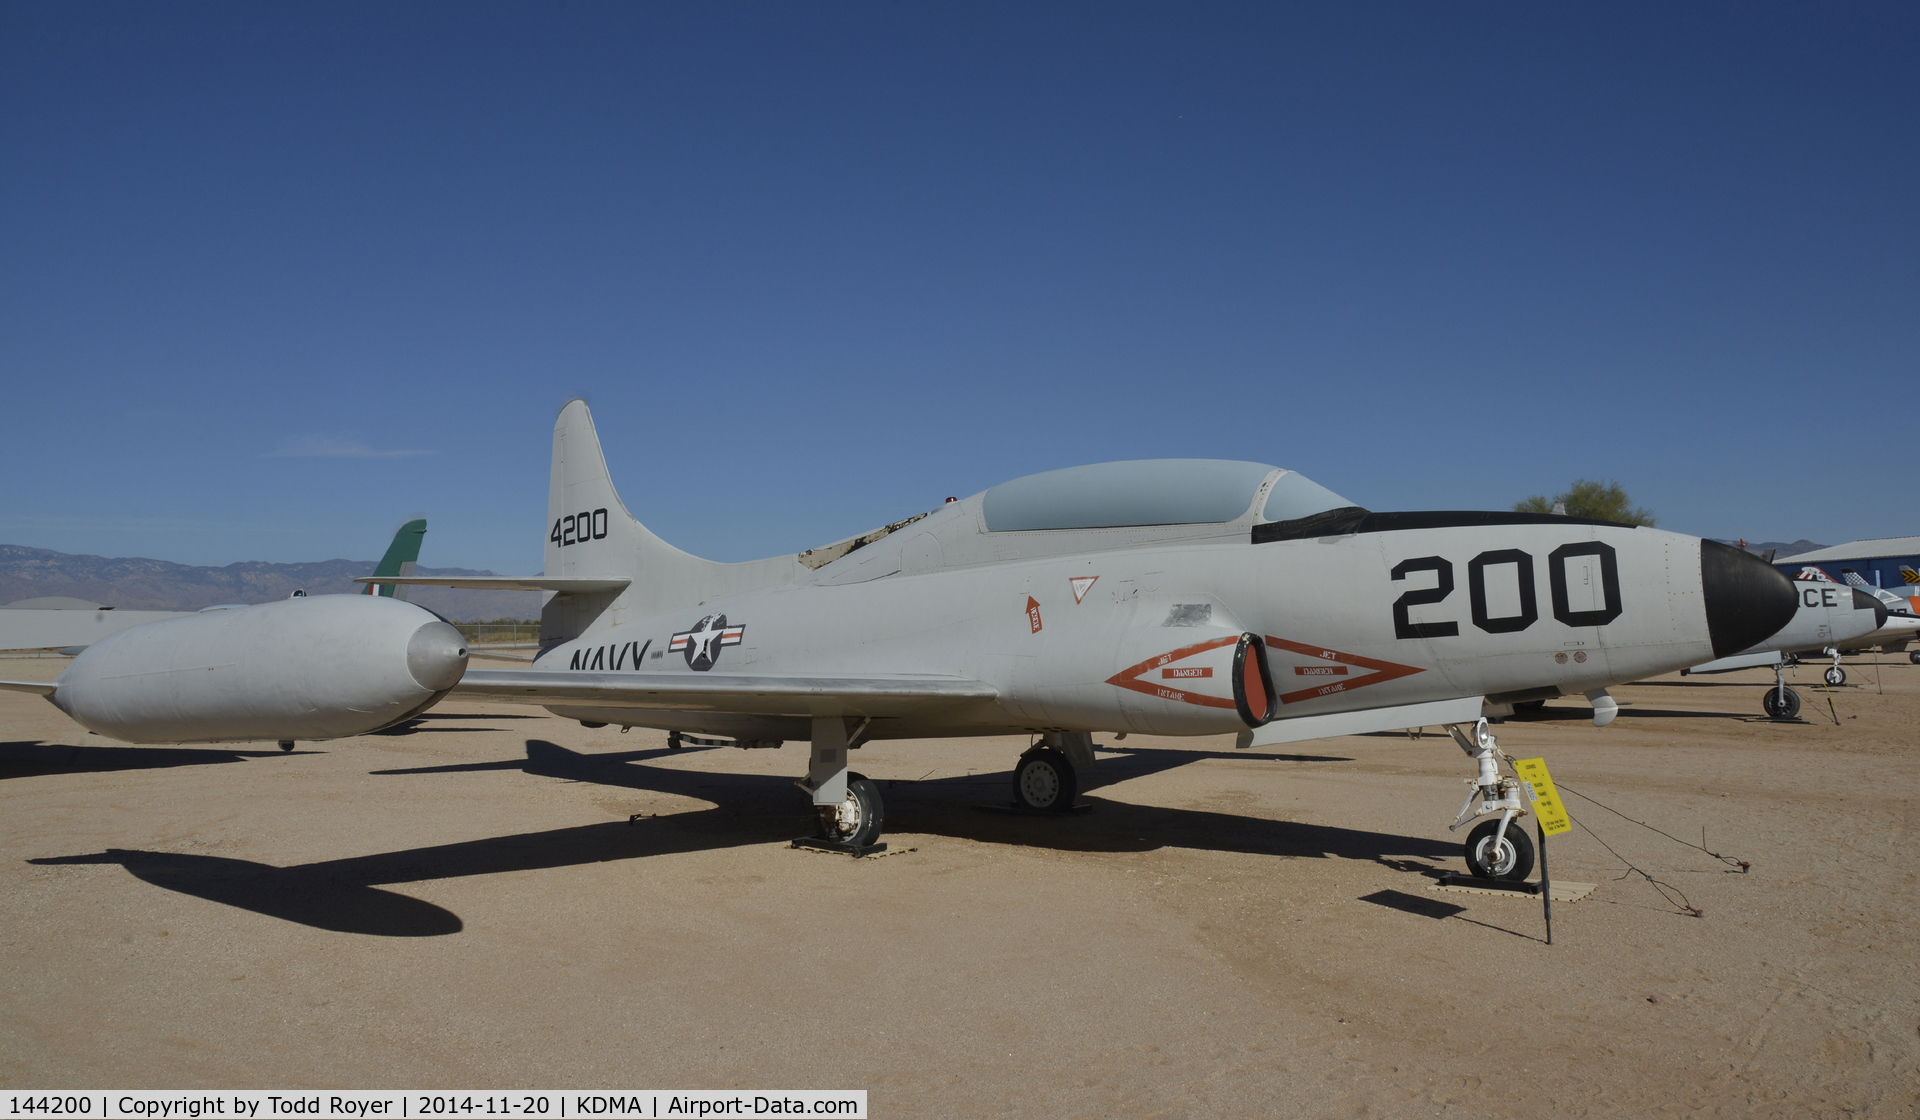 144200, 1957 Lockheed T-1A Seastar C/N 1080-1104, On display at the Pima Air and Space Museum